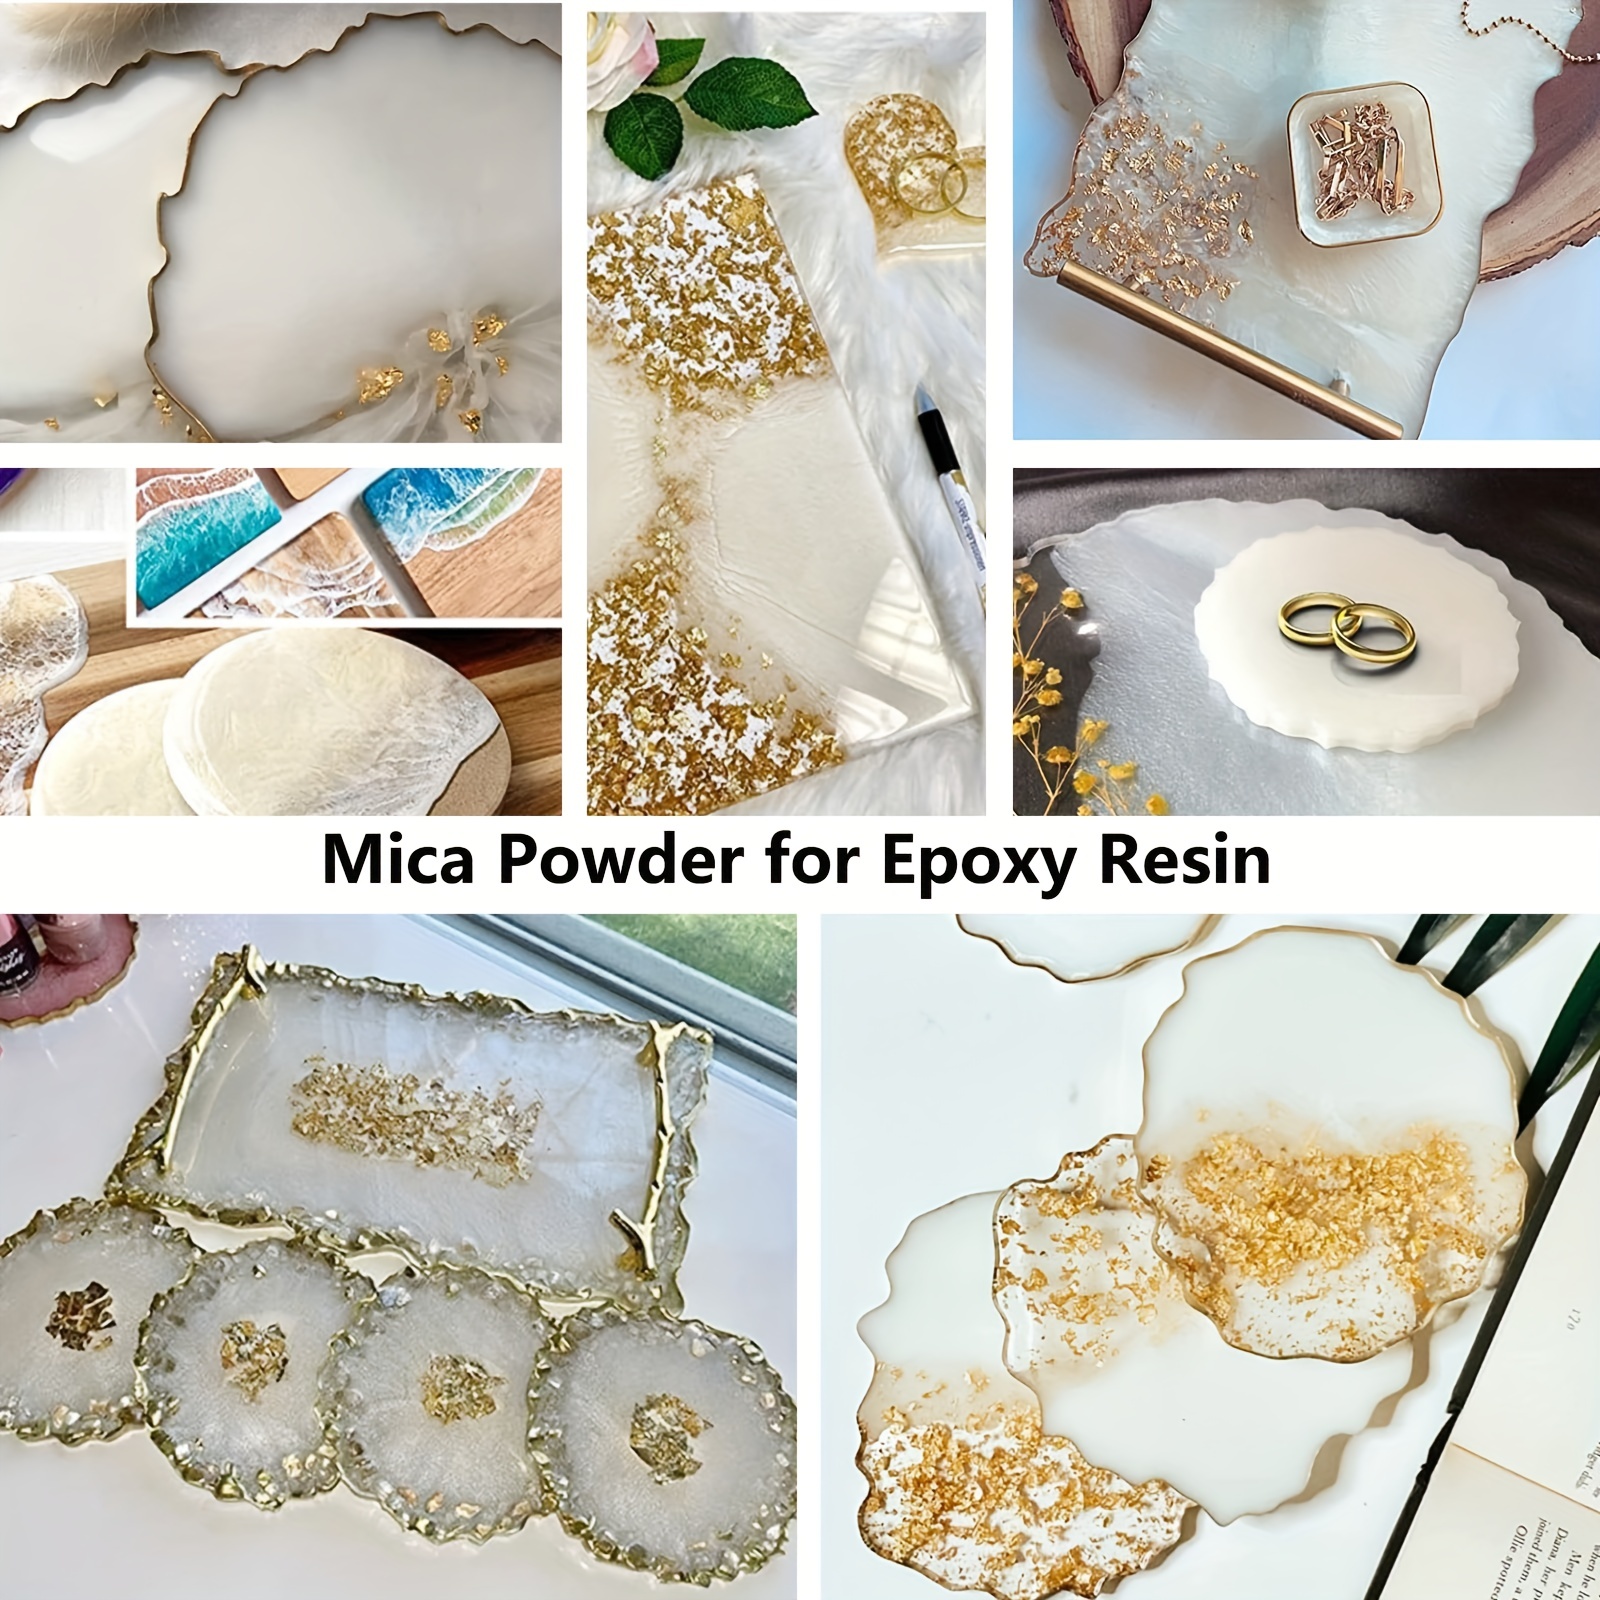 30 Colors Mica Powder for Epoxy Resin, Pearlescent Pigment Powder for Soap  Paint, Jewelery Making, Nail Polish, Candle Making, Bath Bombs, Slime